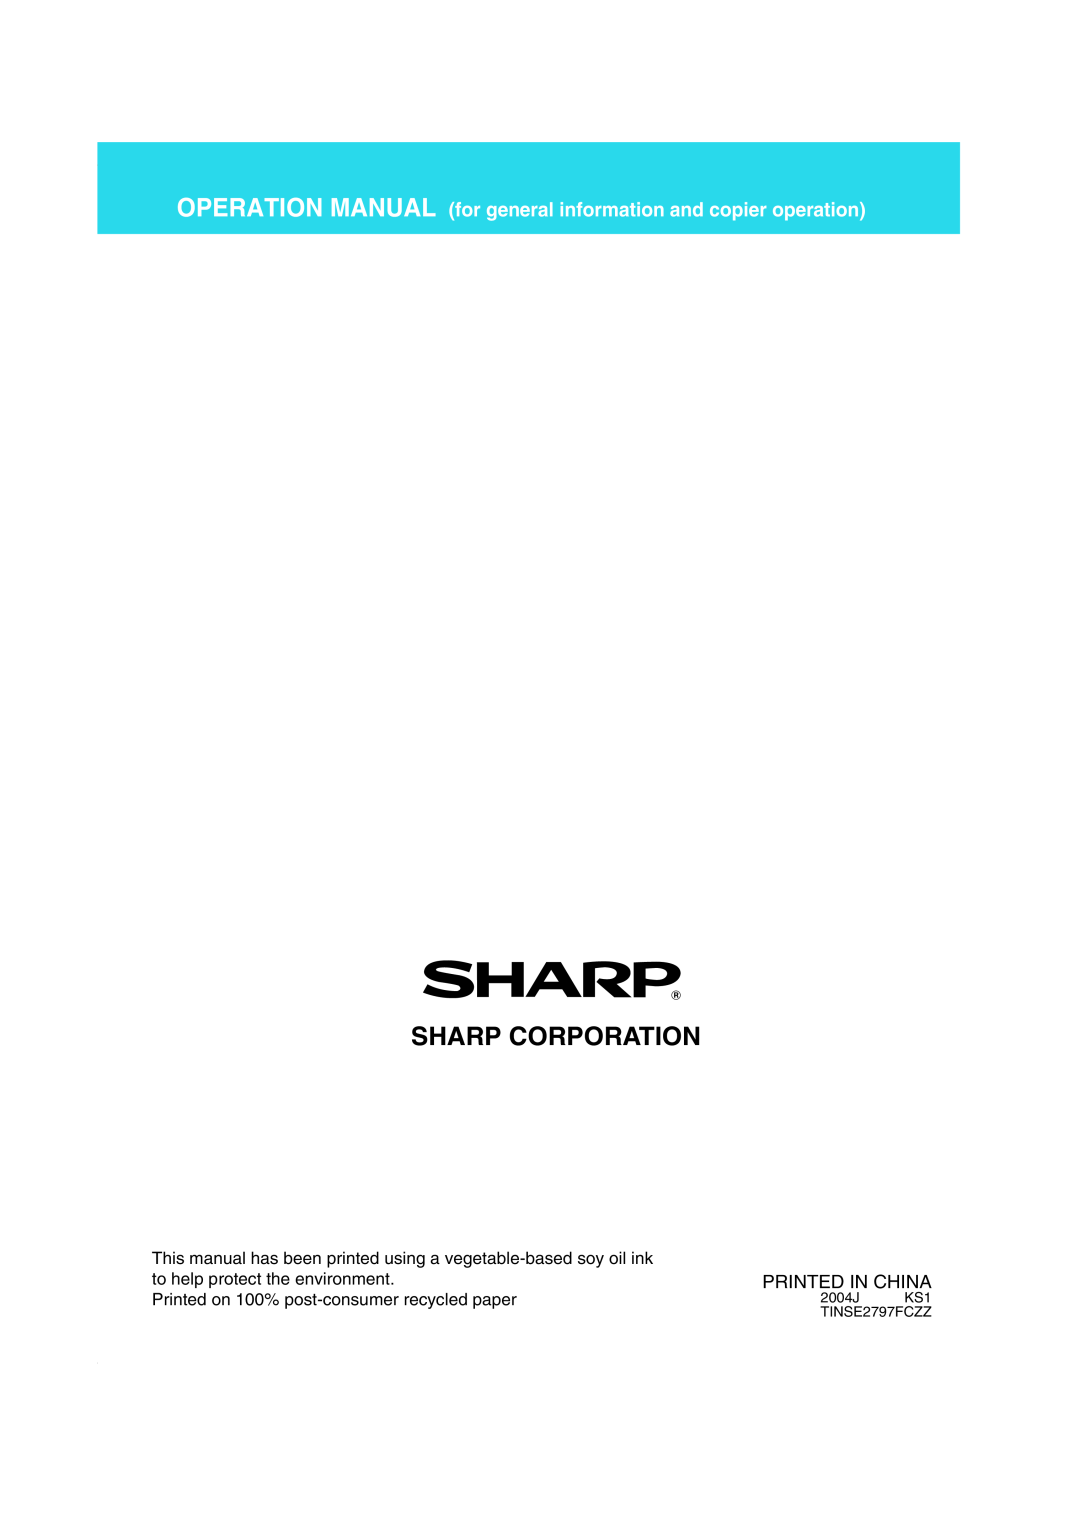 Sharp AR-M451N Sharp Corporation, OPERATION MANUAL for general information and copier operation, Printed In China 